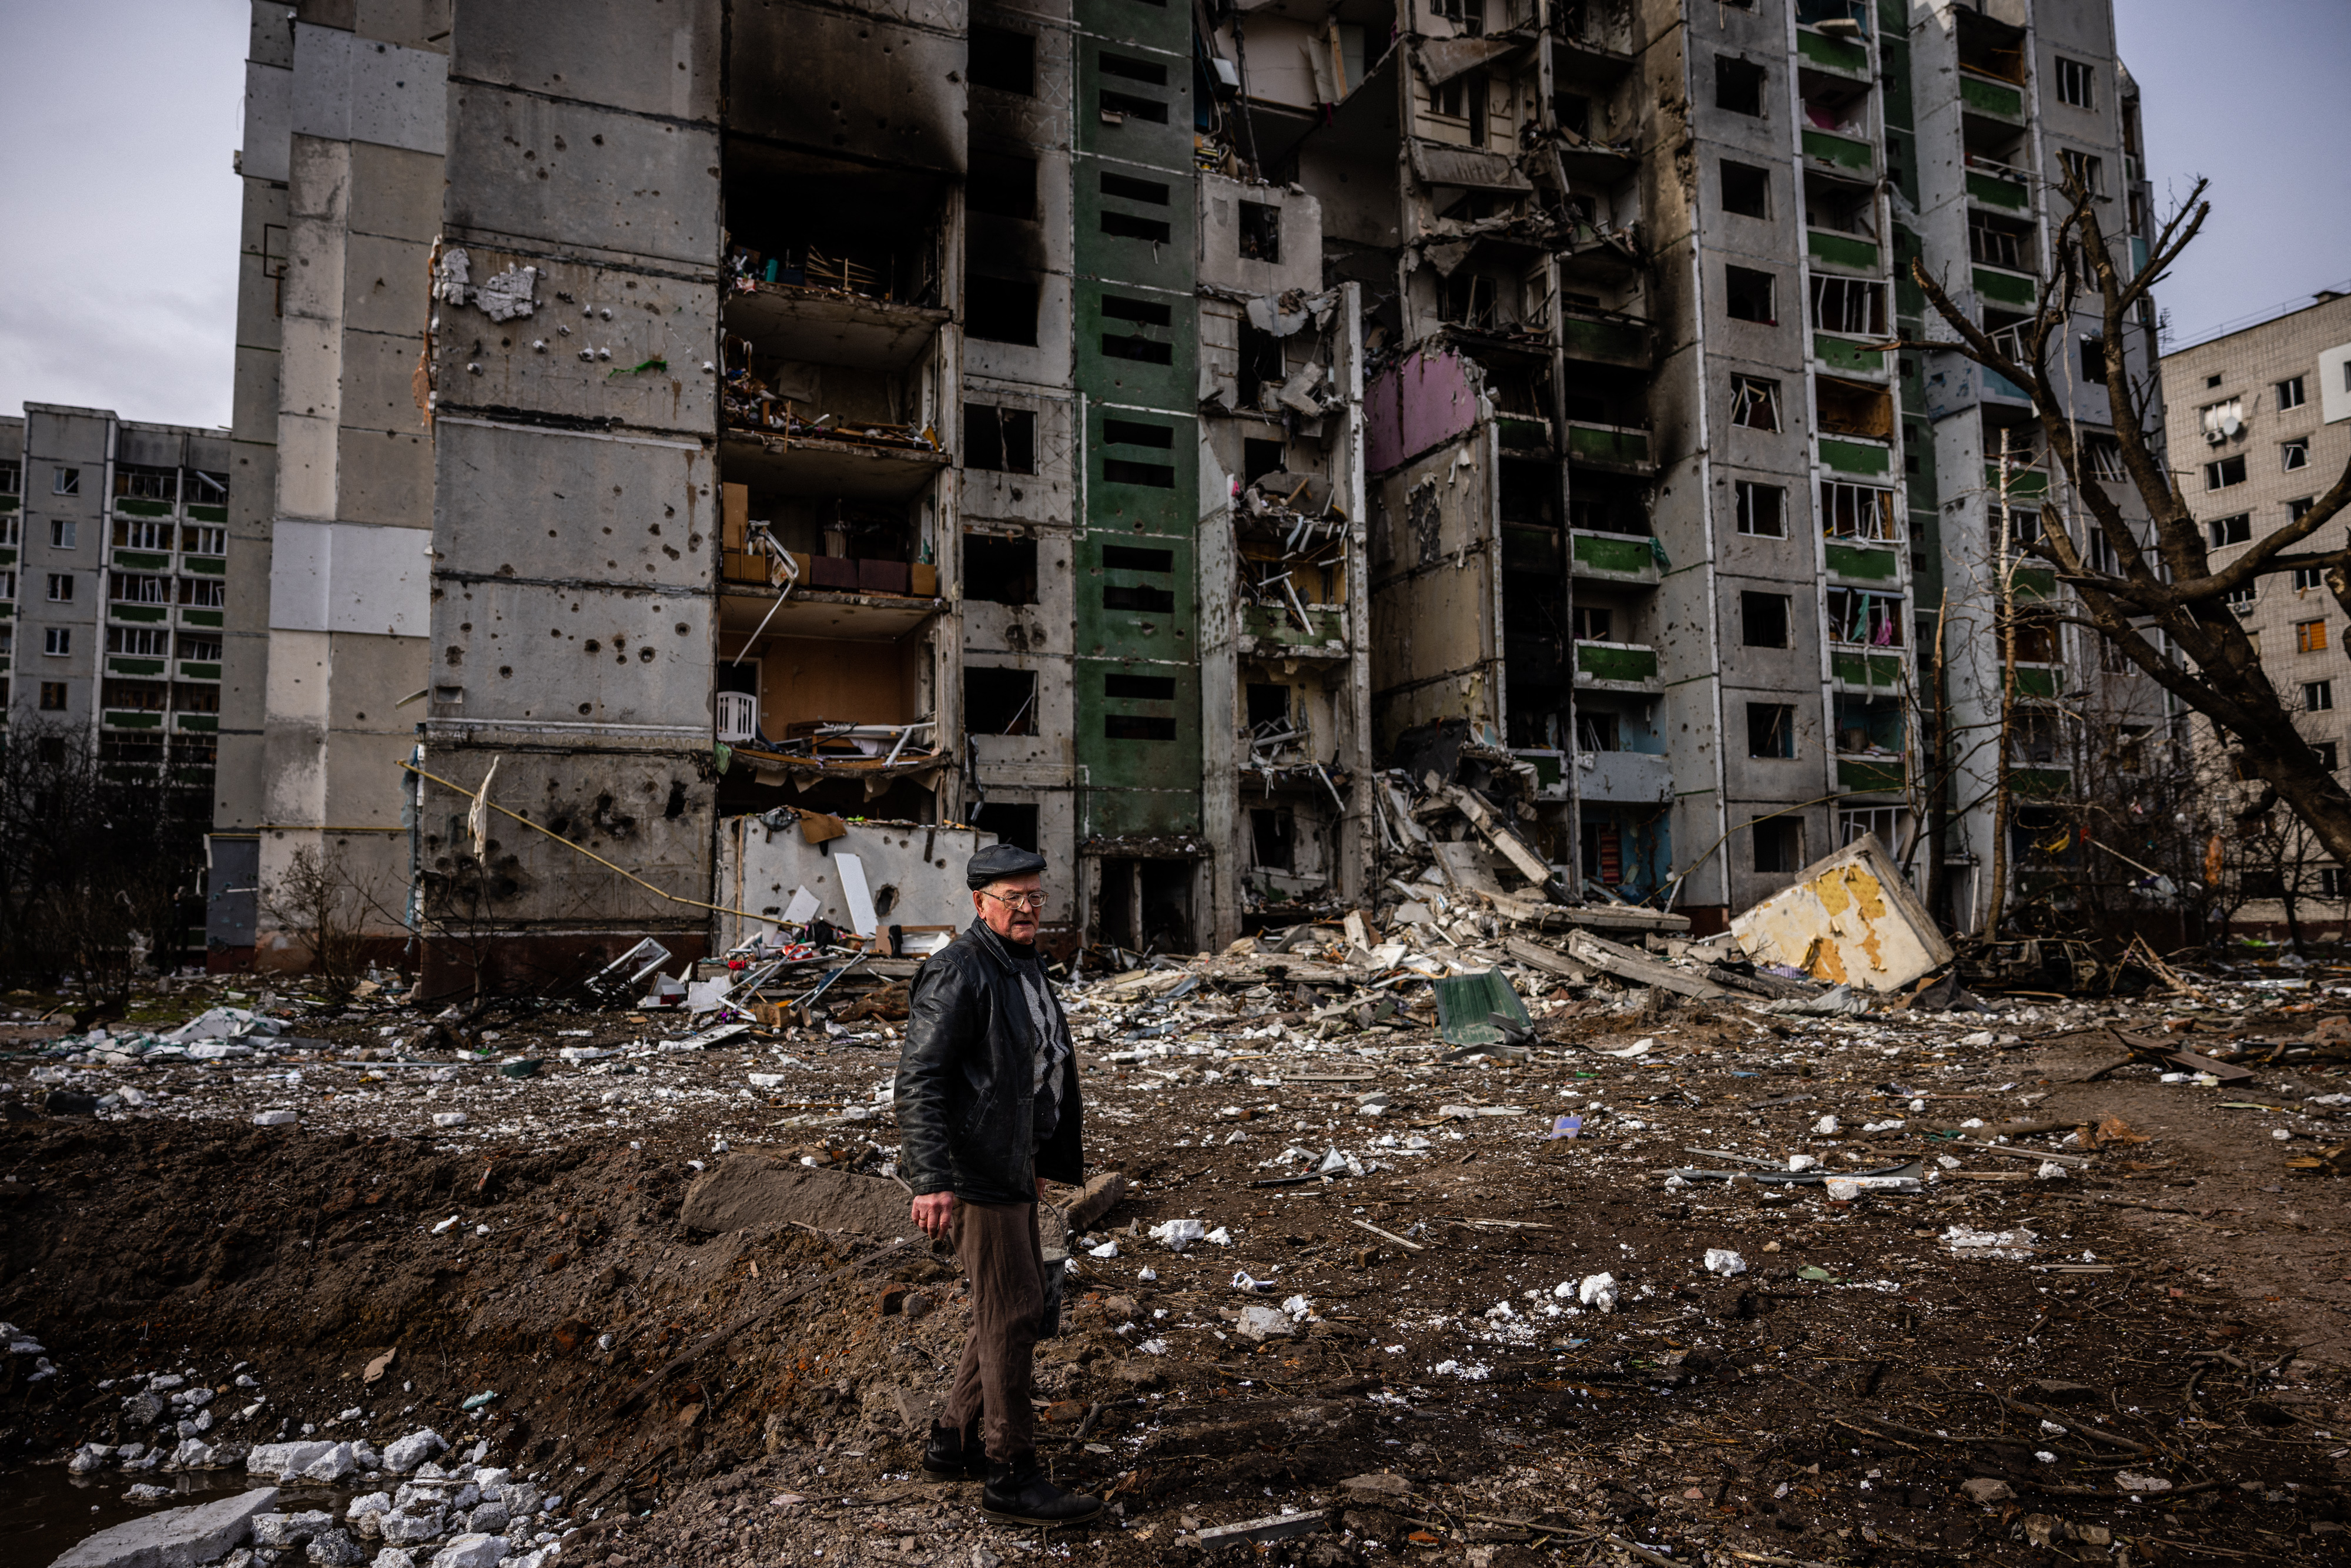 A man stands in front of a residential building damaged in yesterday's shelling in the city of Chernihiv on March 4, 2022. - Fourty-seven people died on March 3 when Russian forces hit residential areas, including schools and a high-rise apartment building, in the northern Ukrainian city of Chernihiv, officials said. (Photo by Dimitar DILKOFF / AFP)